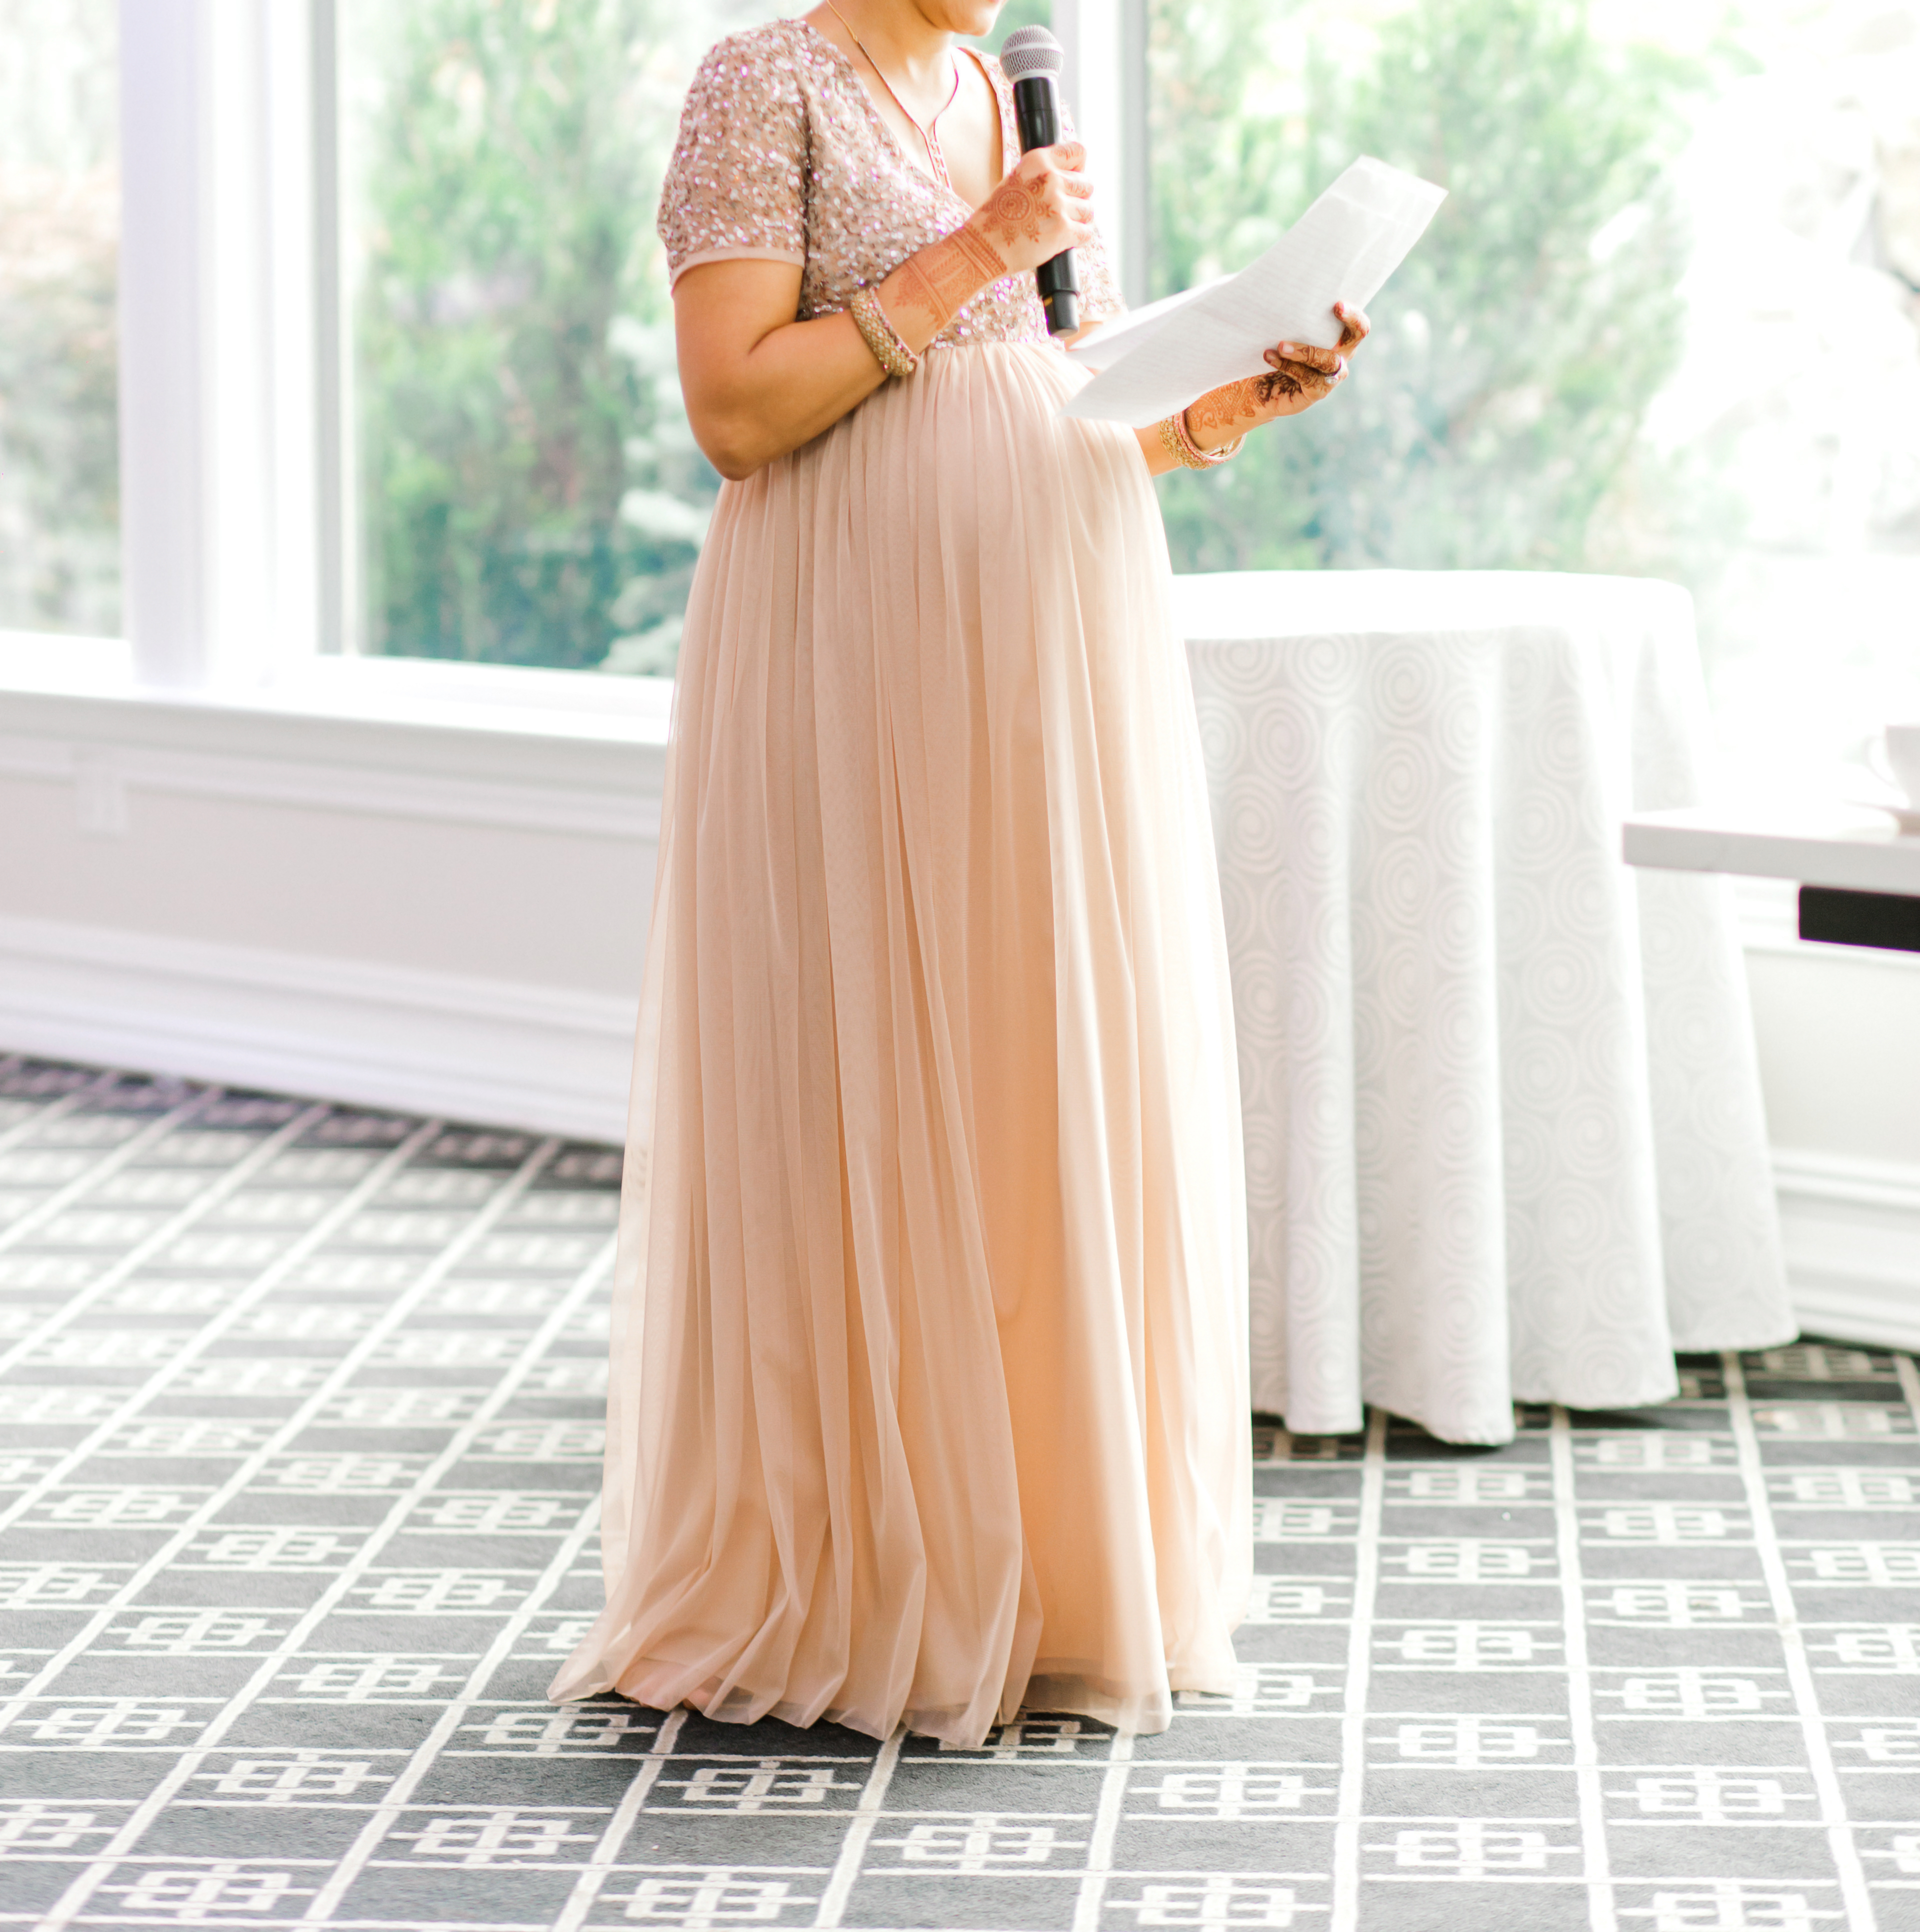 An image of someone from a wedding party giving a speech | Source: Shutterstock